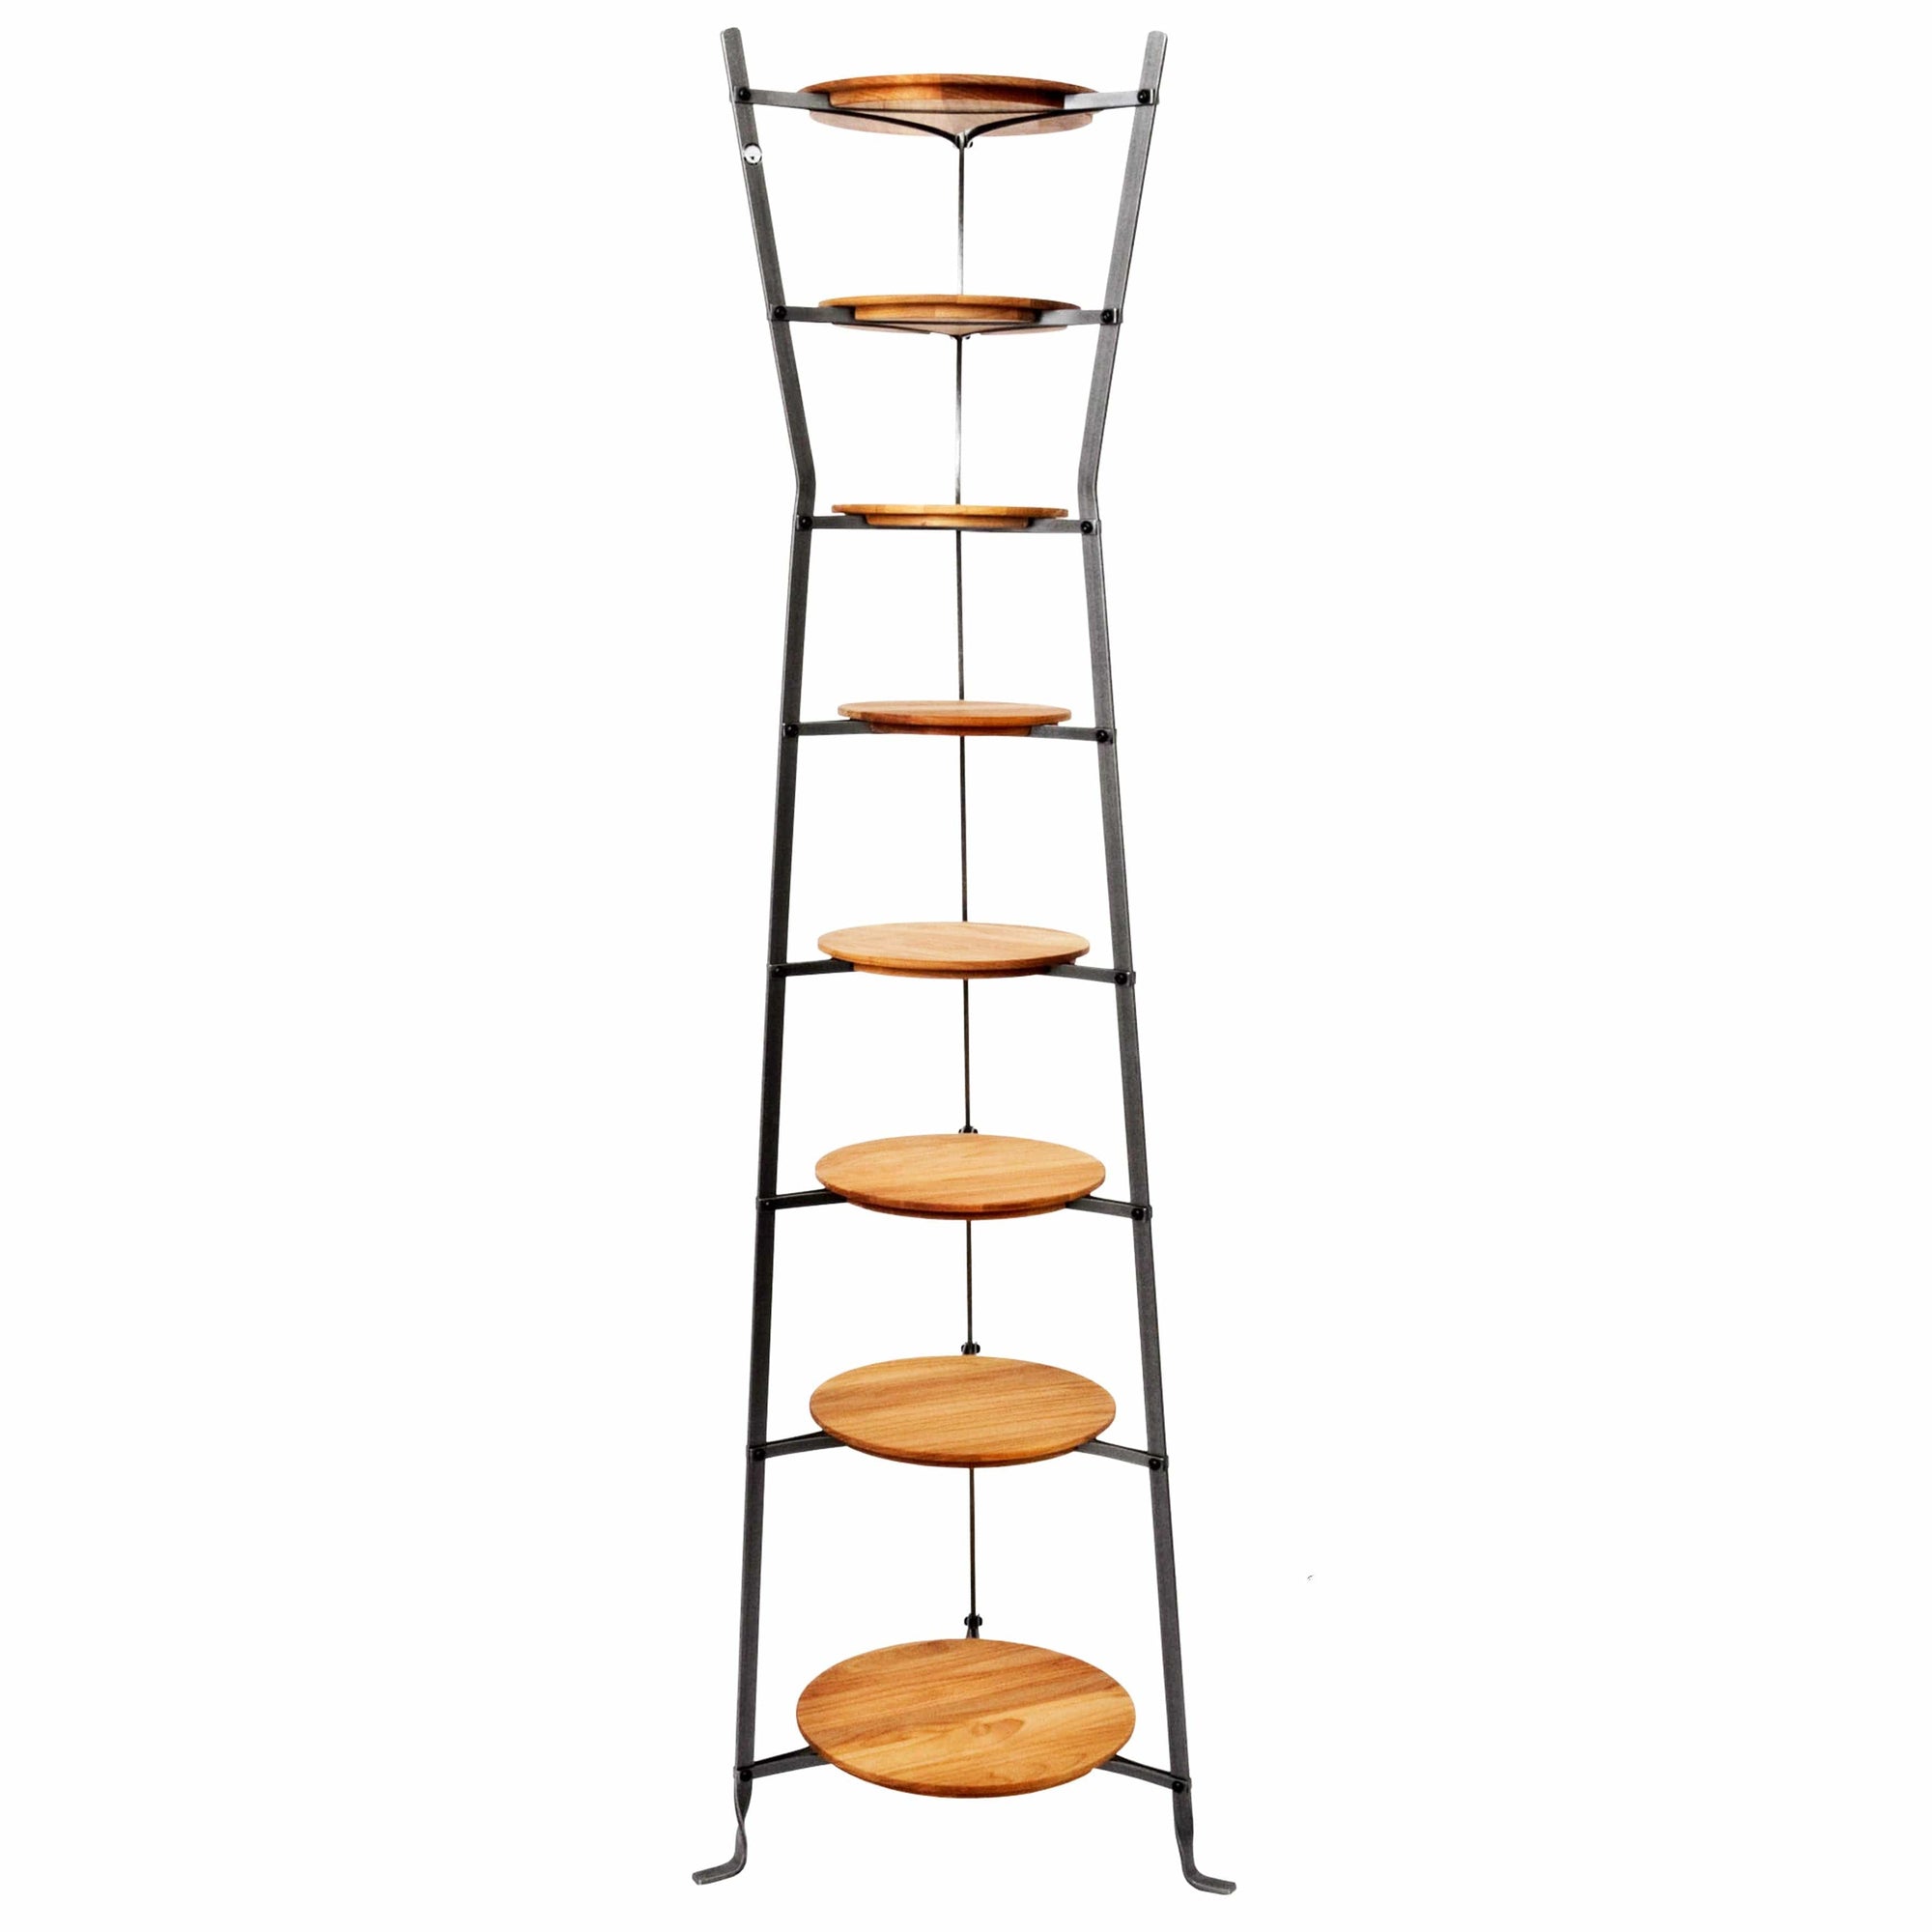 Enclume 8-Tier Hammered Steel Cookware Stand